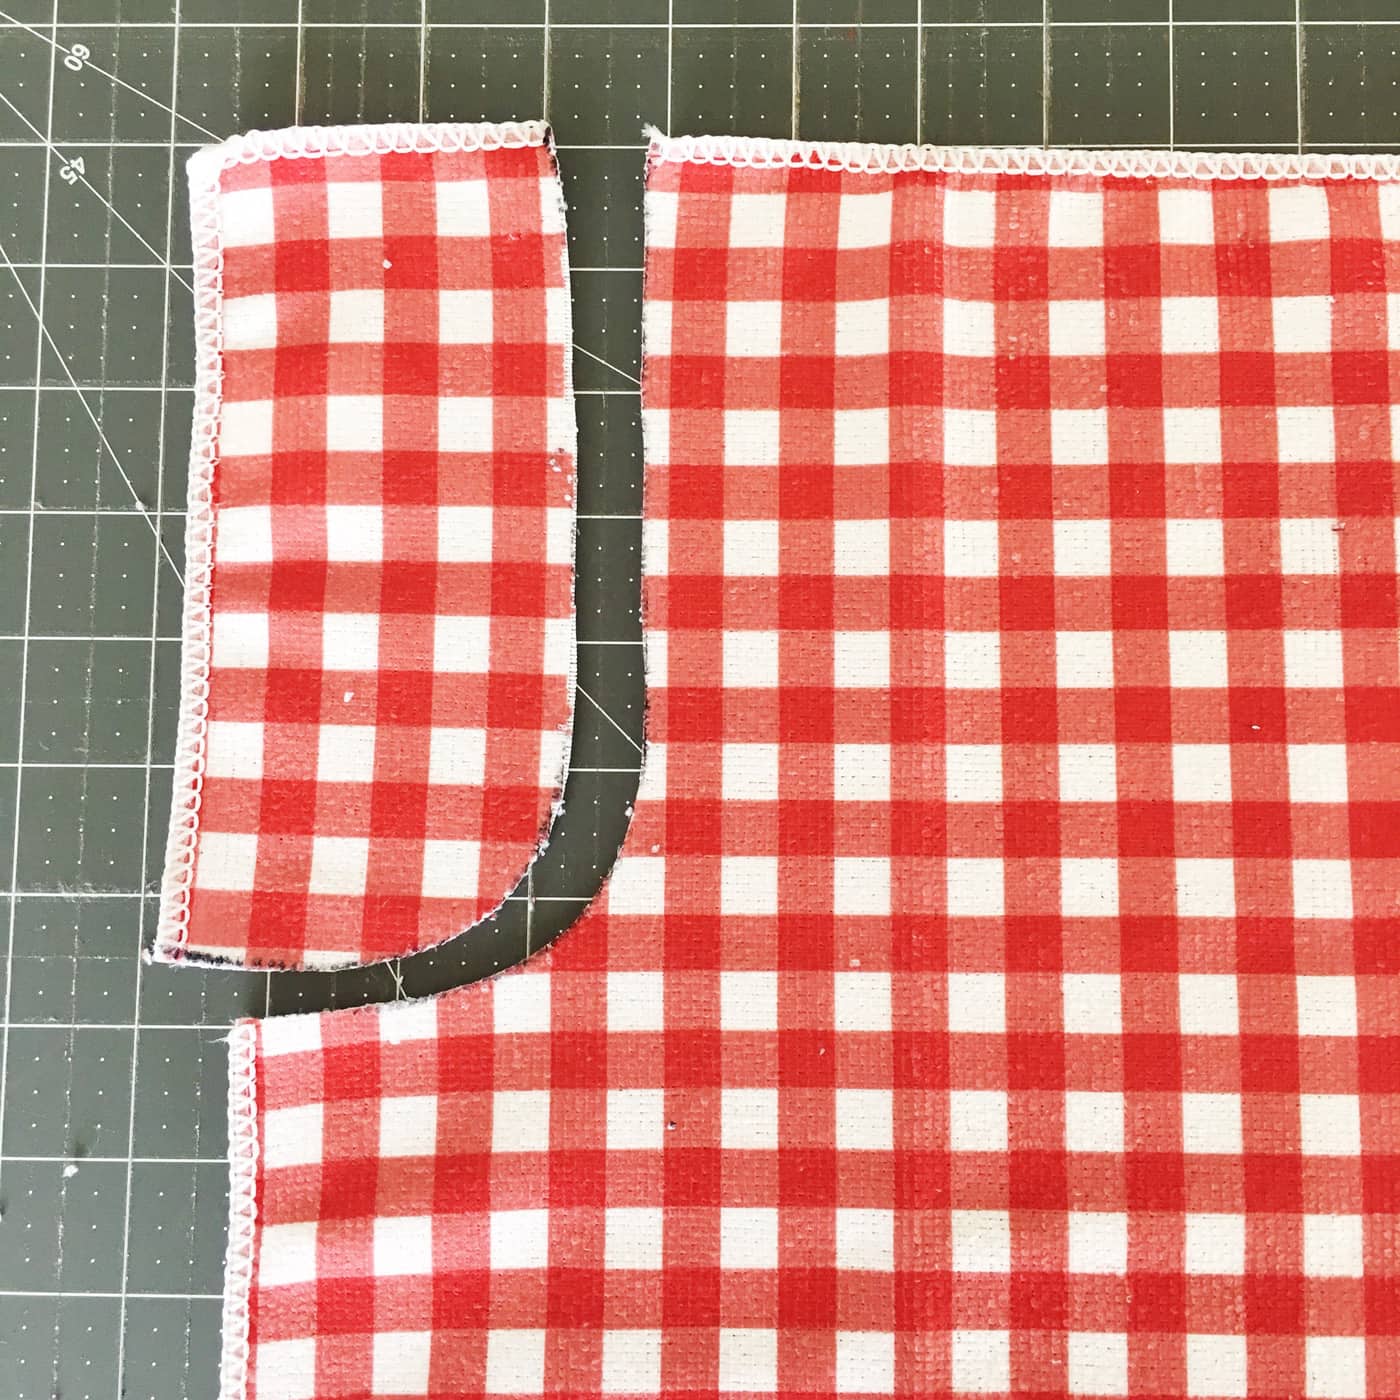 cutting out the towels to make apron